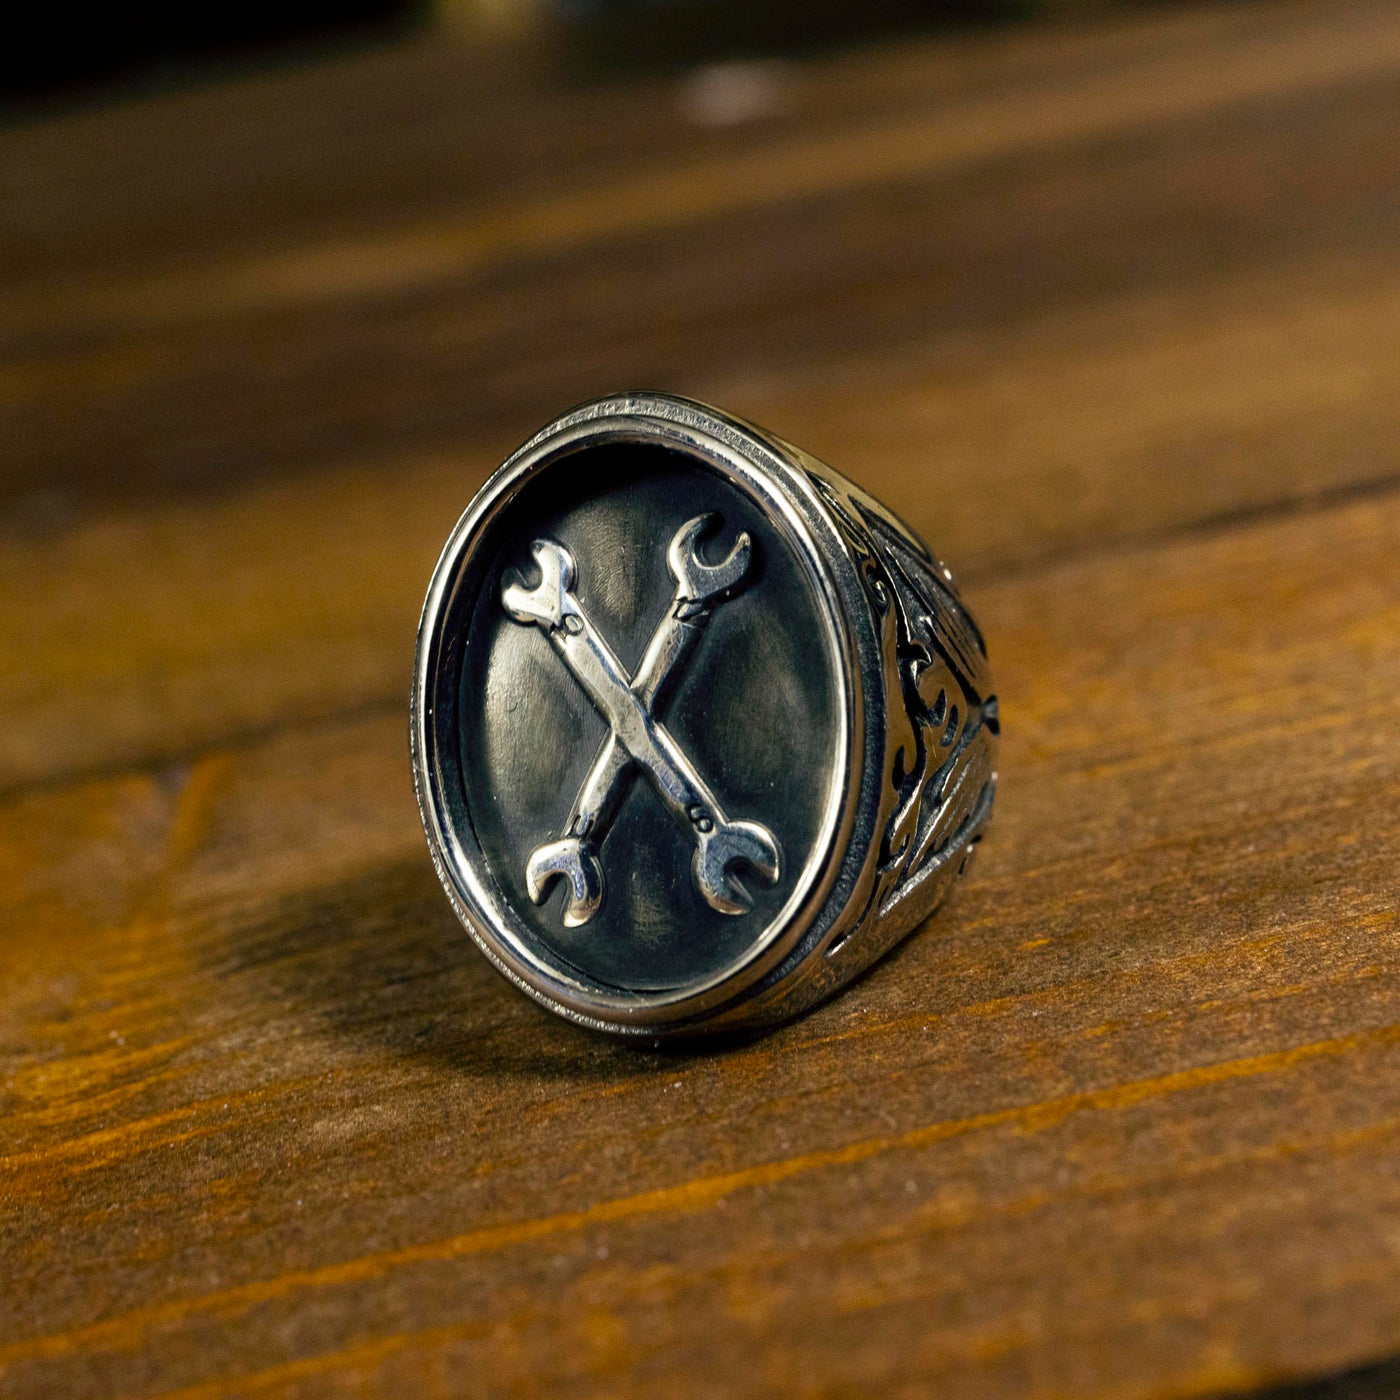 Ring - Signet ring "SPANNERS" Silver & steel